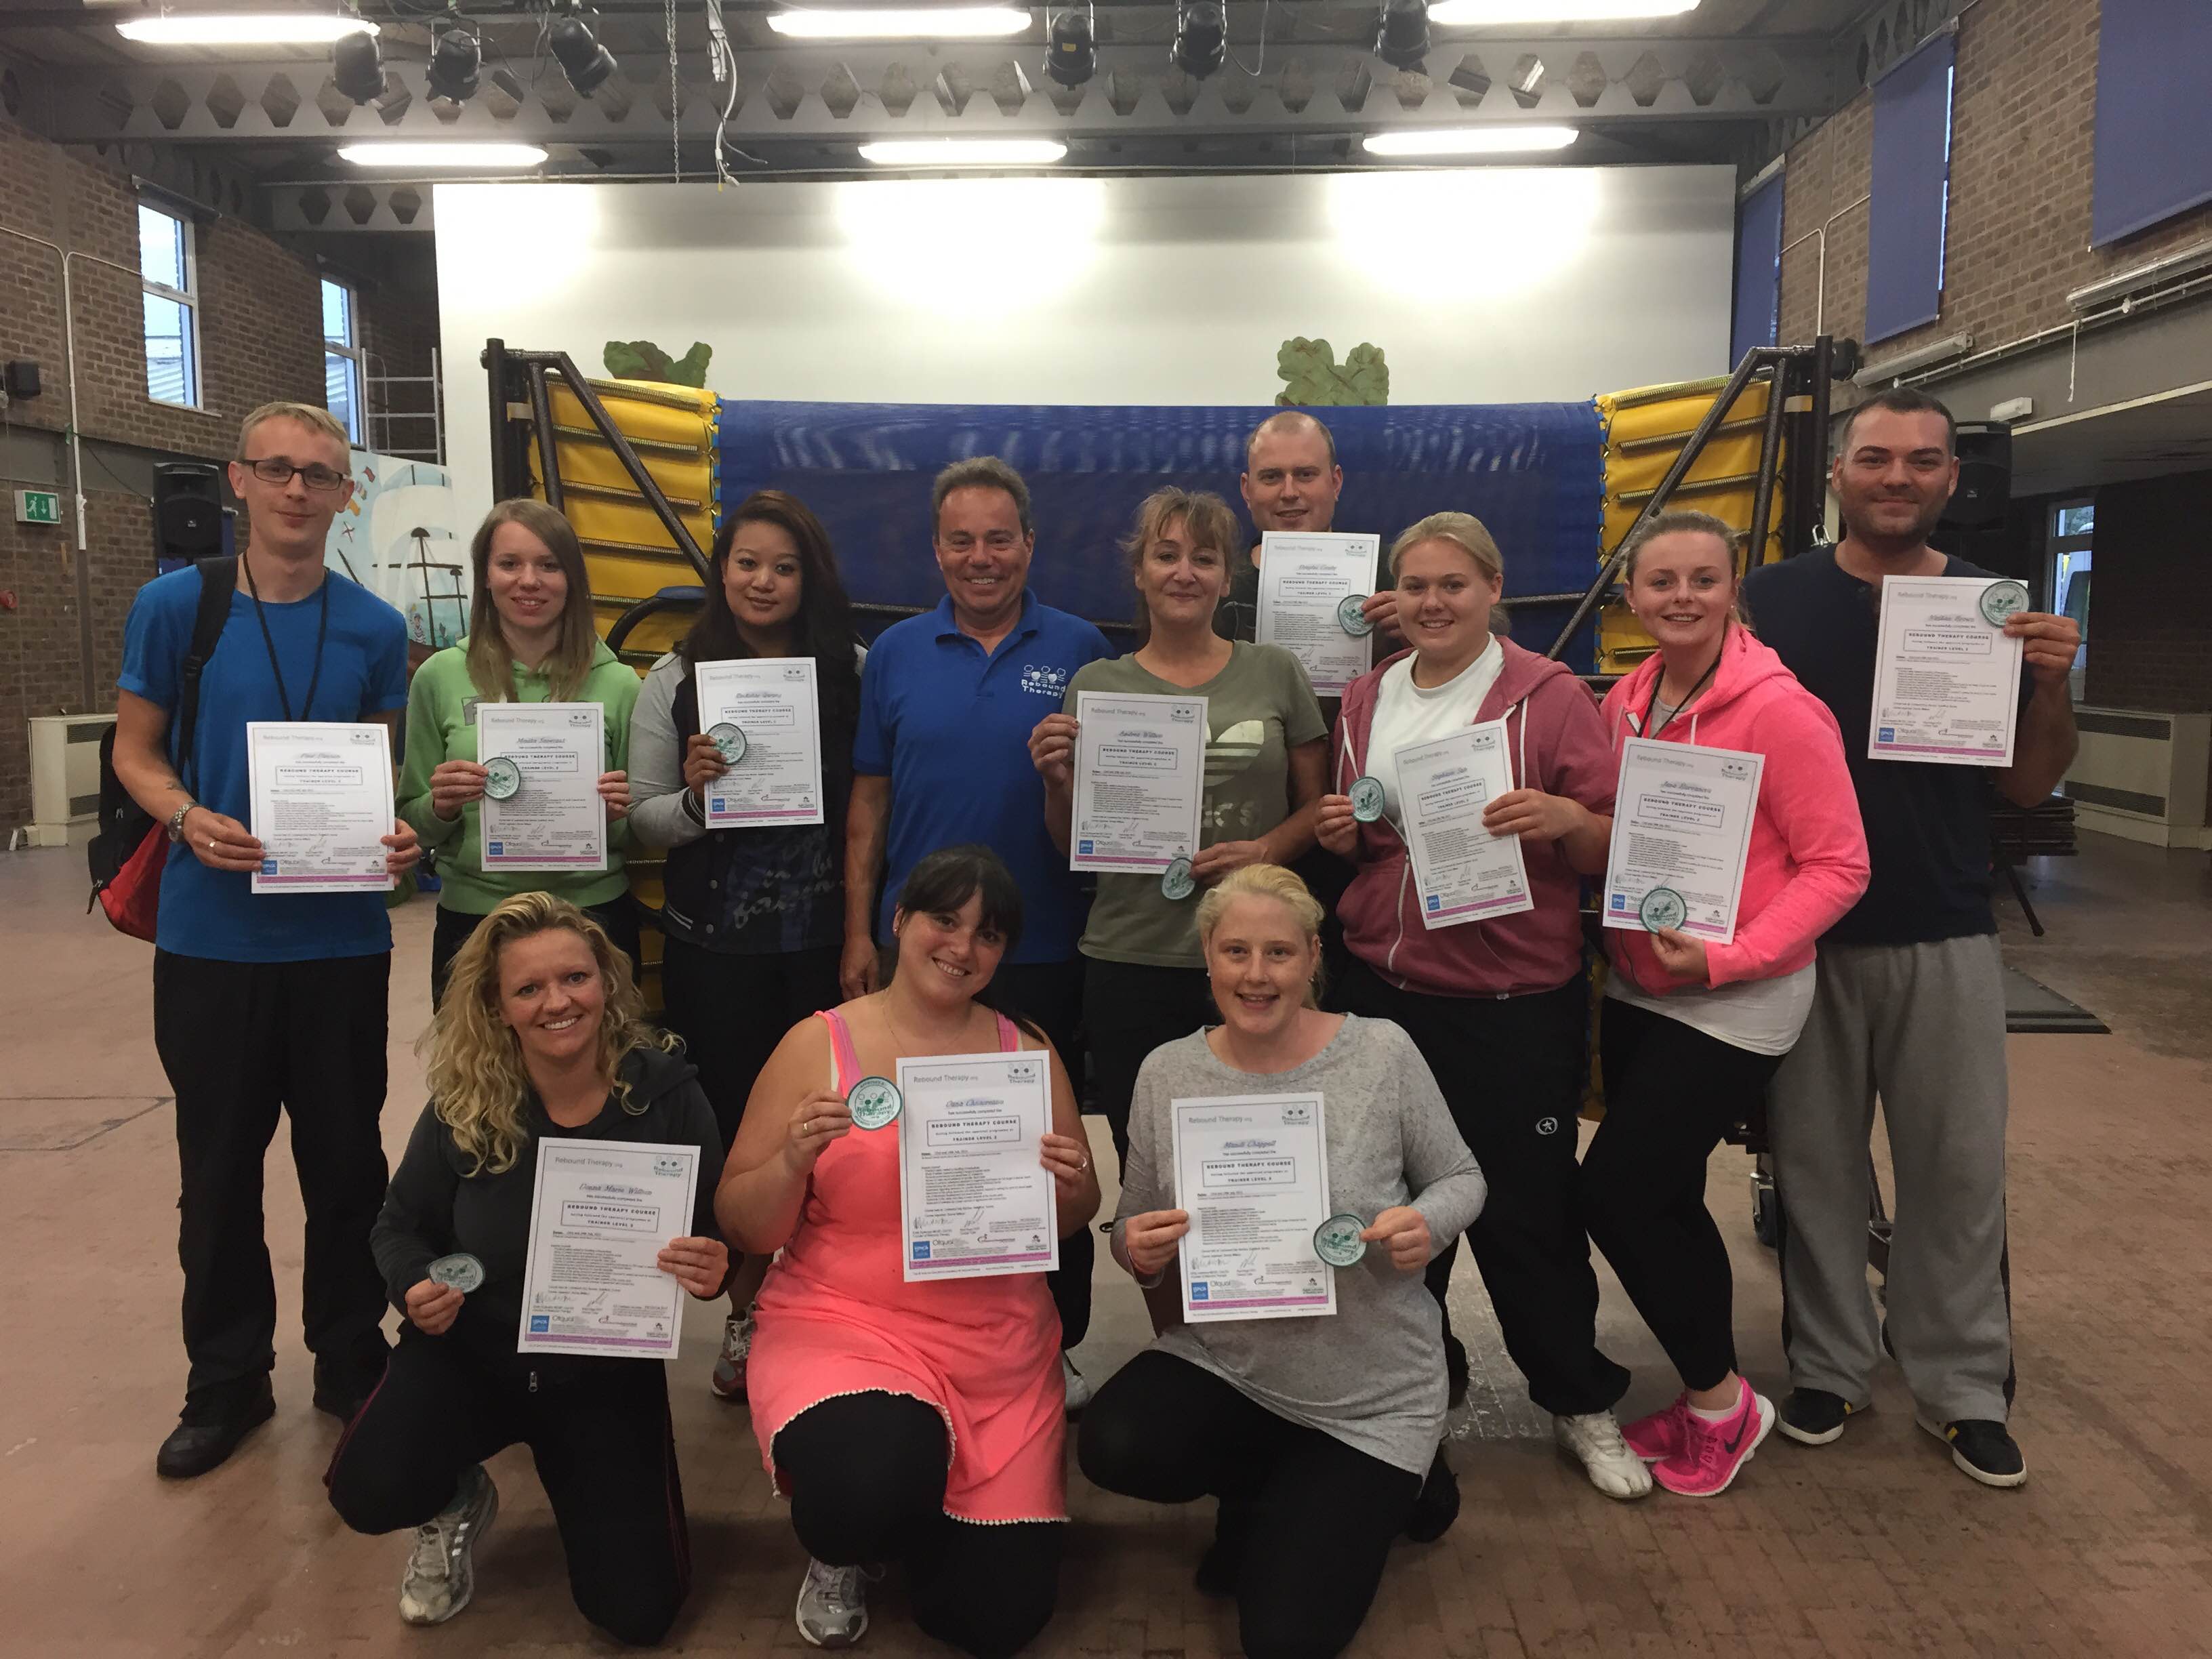 11 newly trained Rebound Therapists with their certificates and their trainer